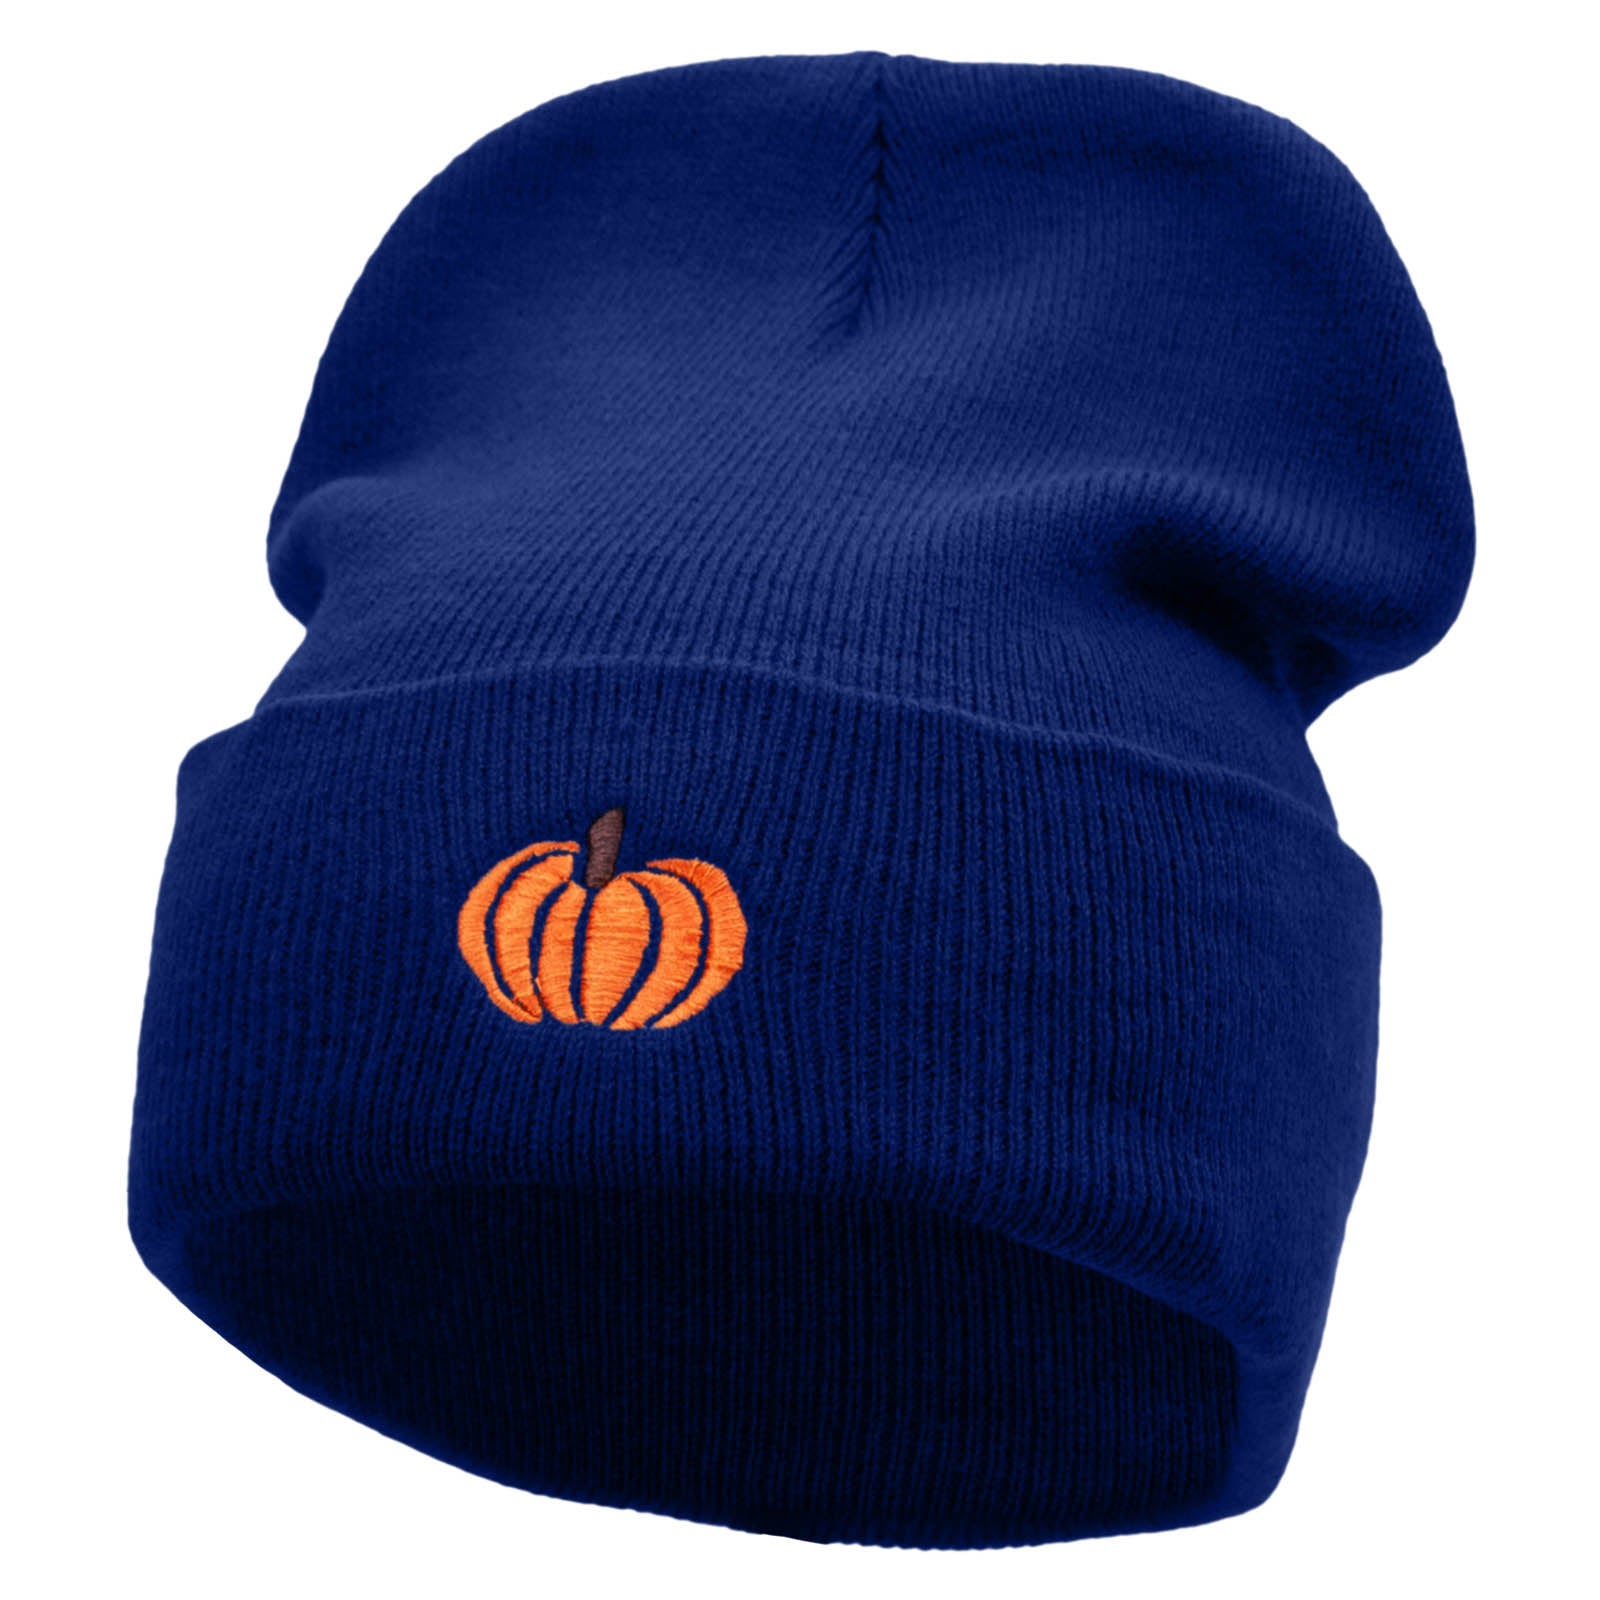 Autumn Pumpkin Embroidered 12 Inch Long Knitted Beanie - Royal OSFM